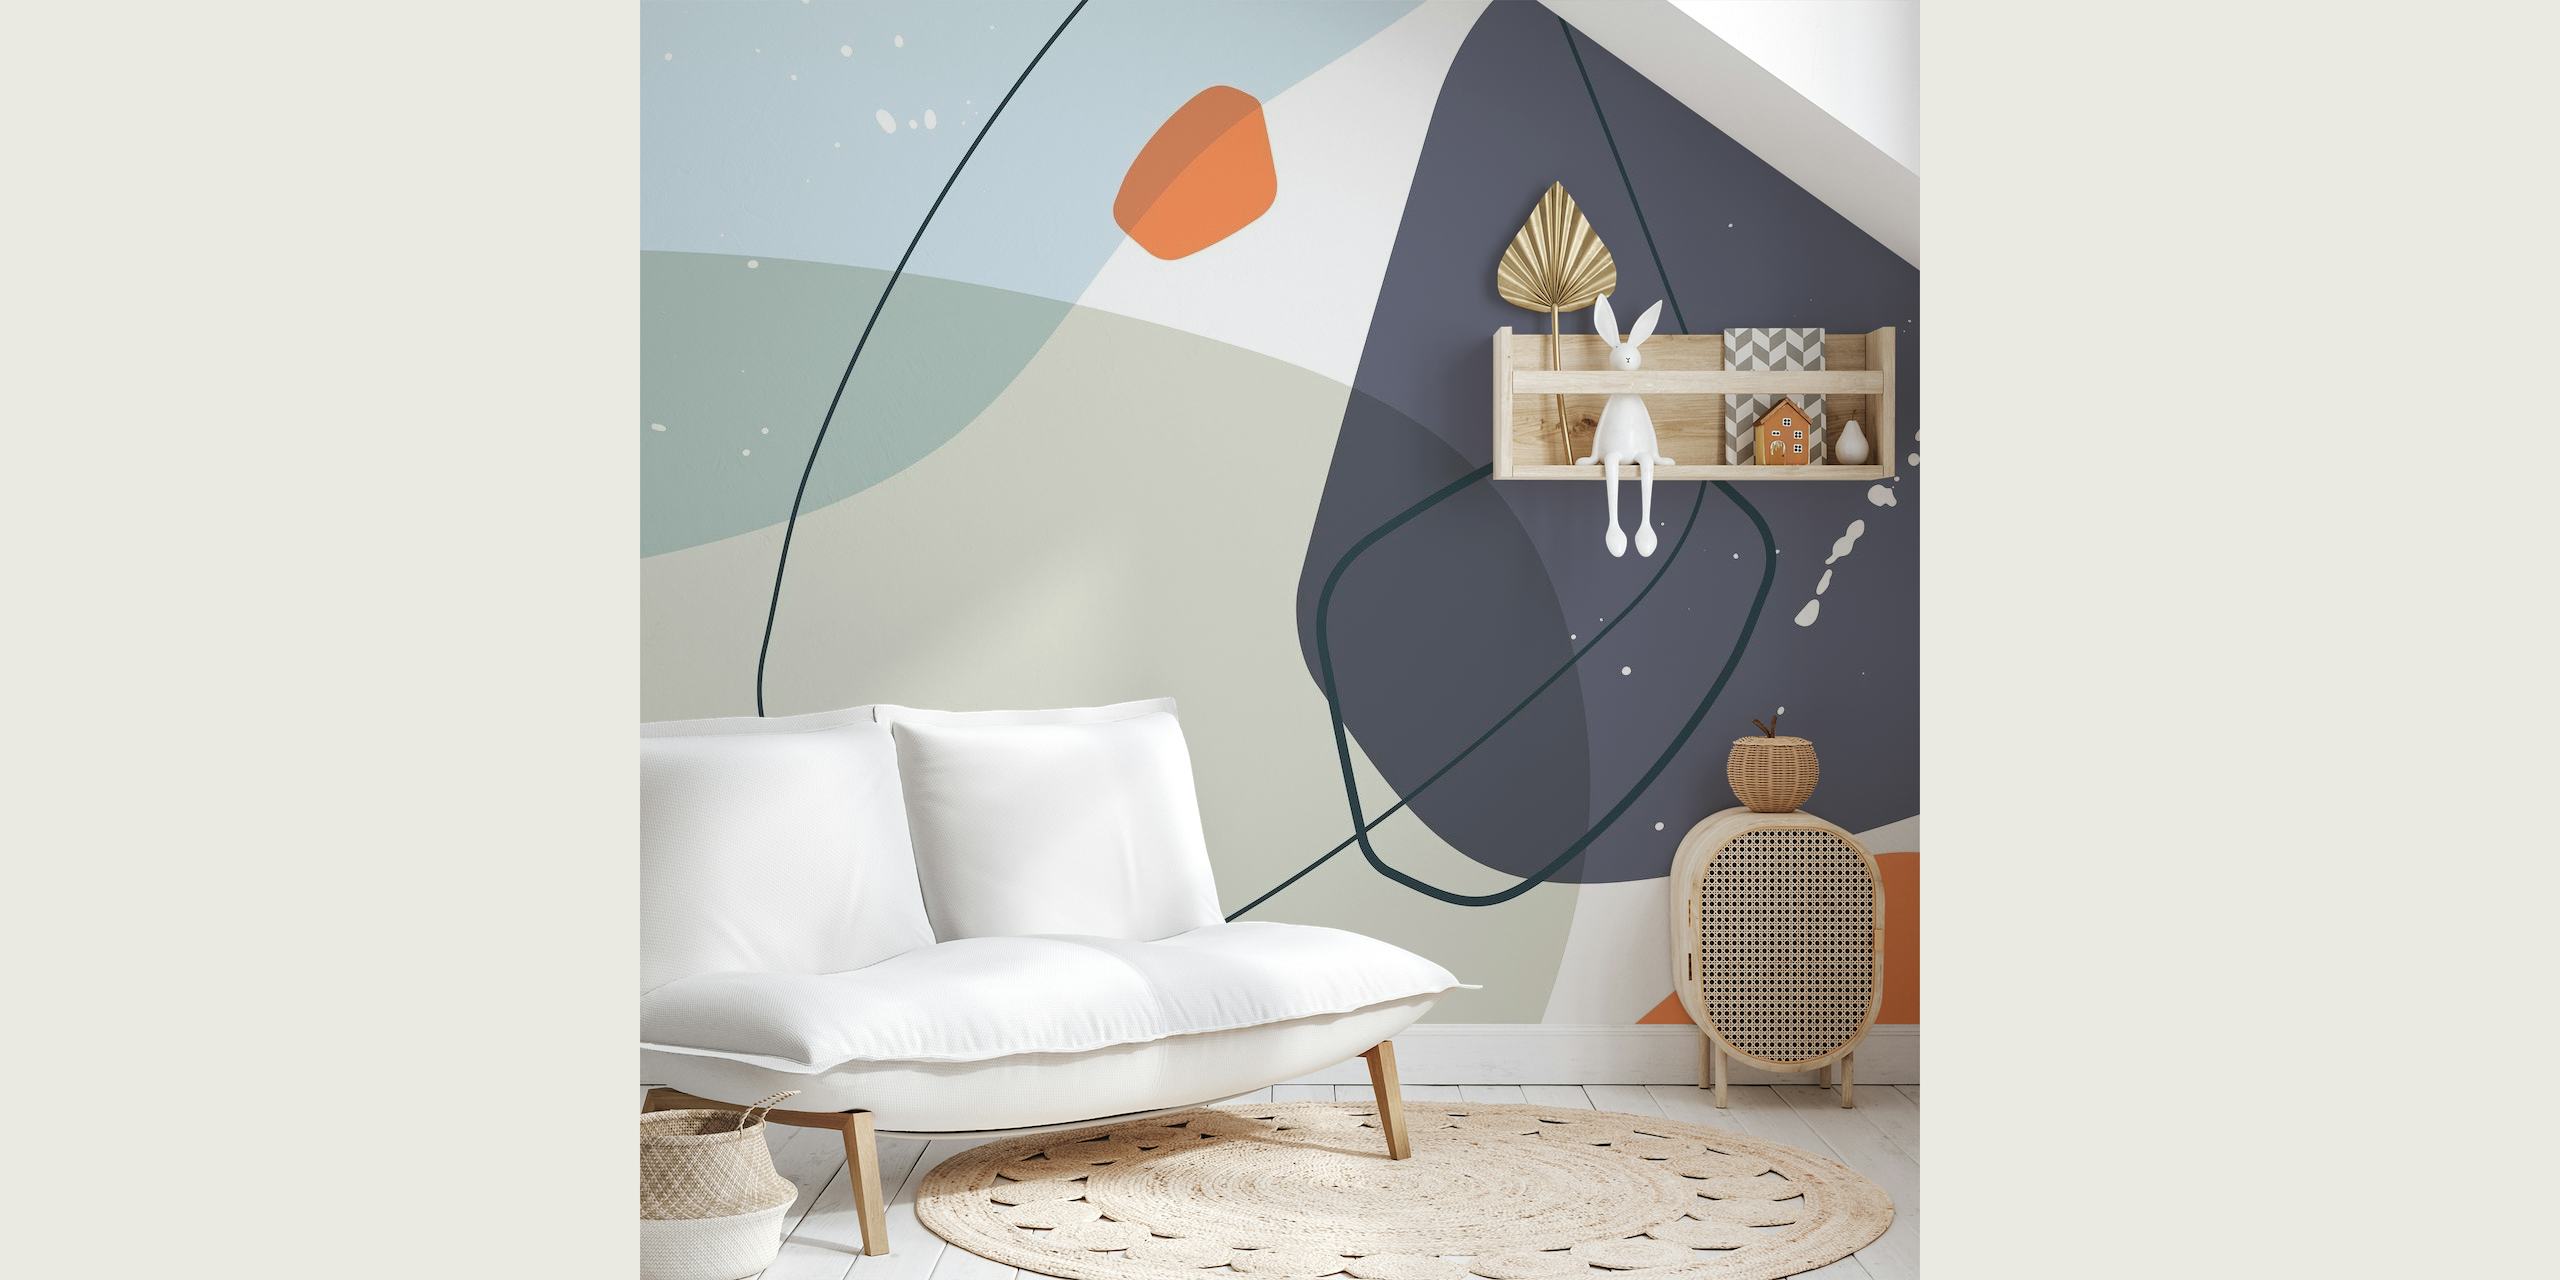 Colorful and creative abstract wallpaper designed for kids play room